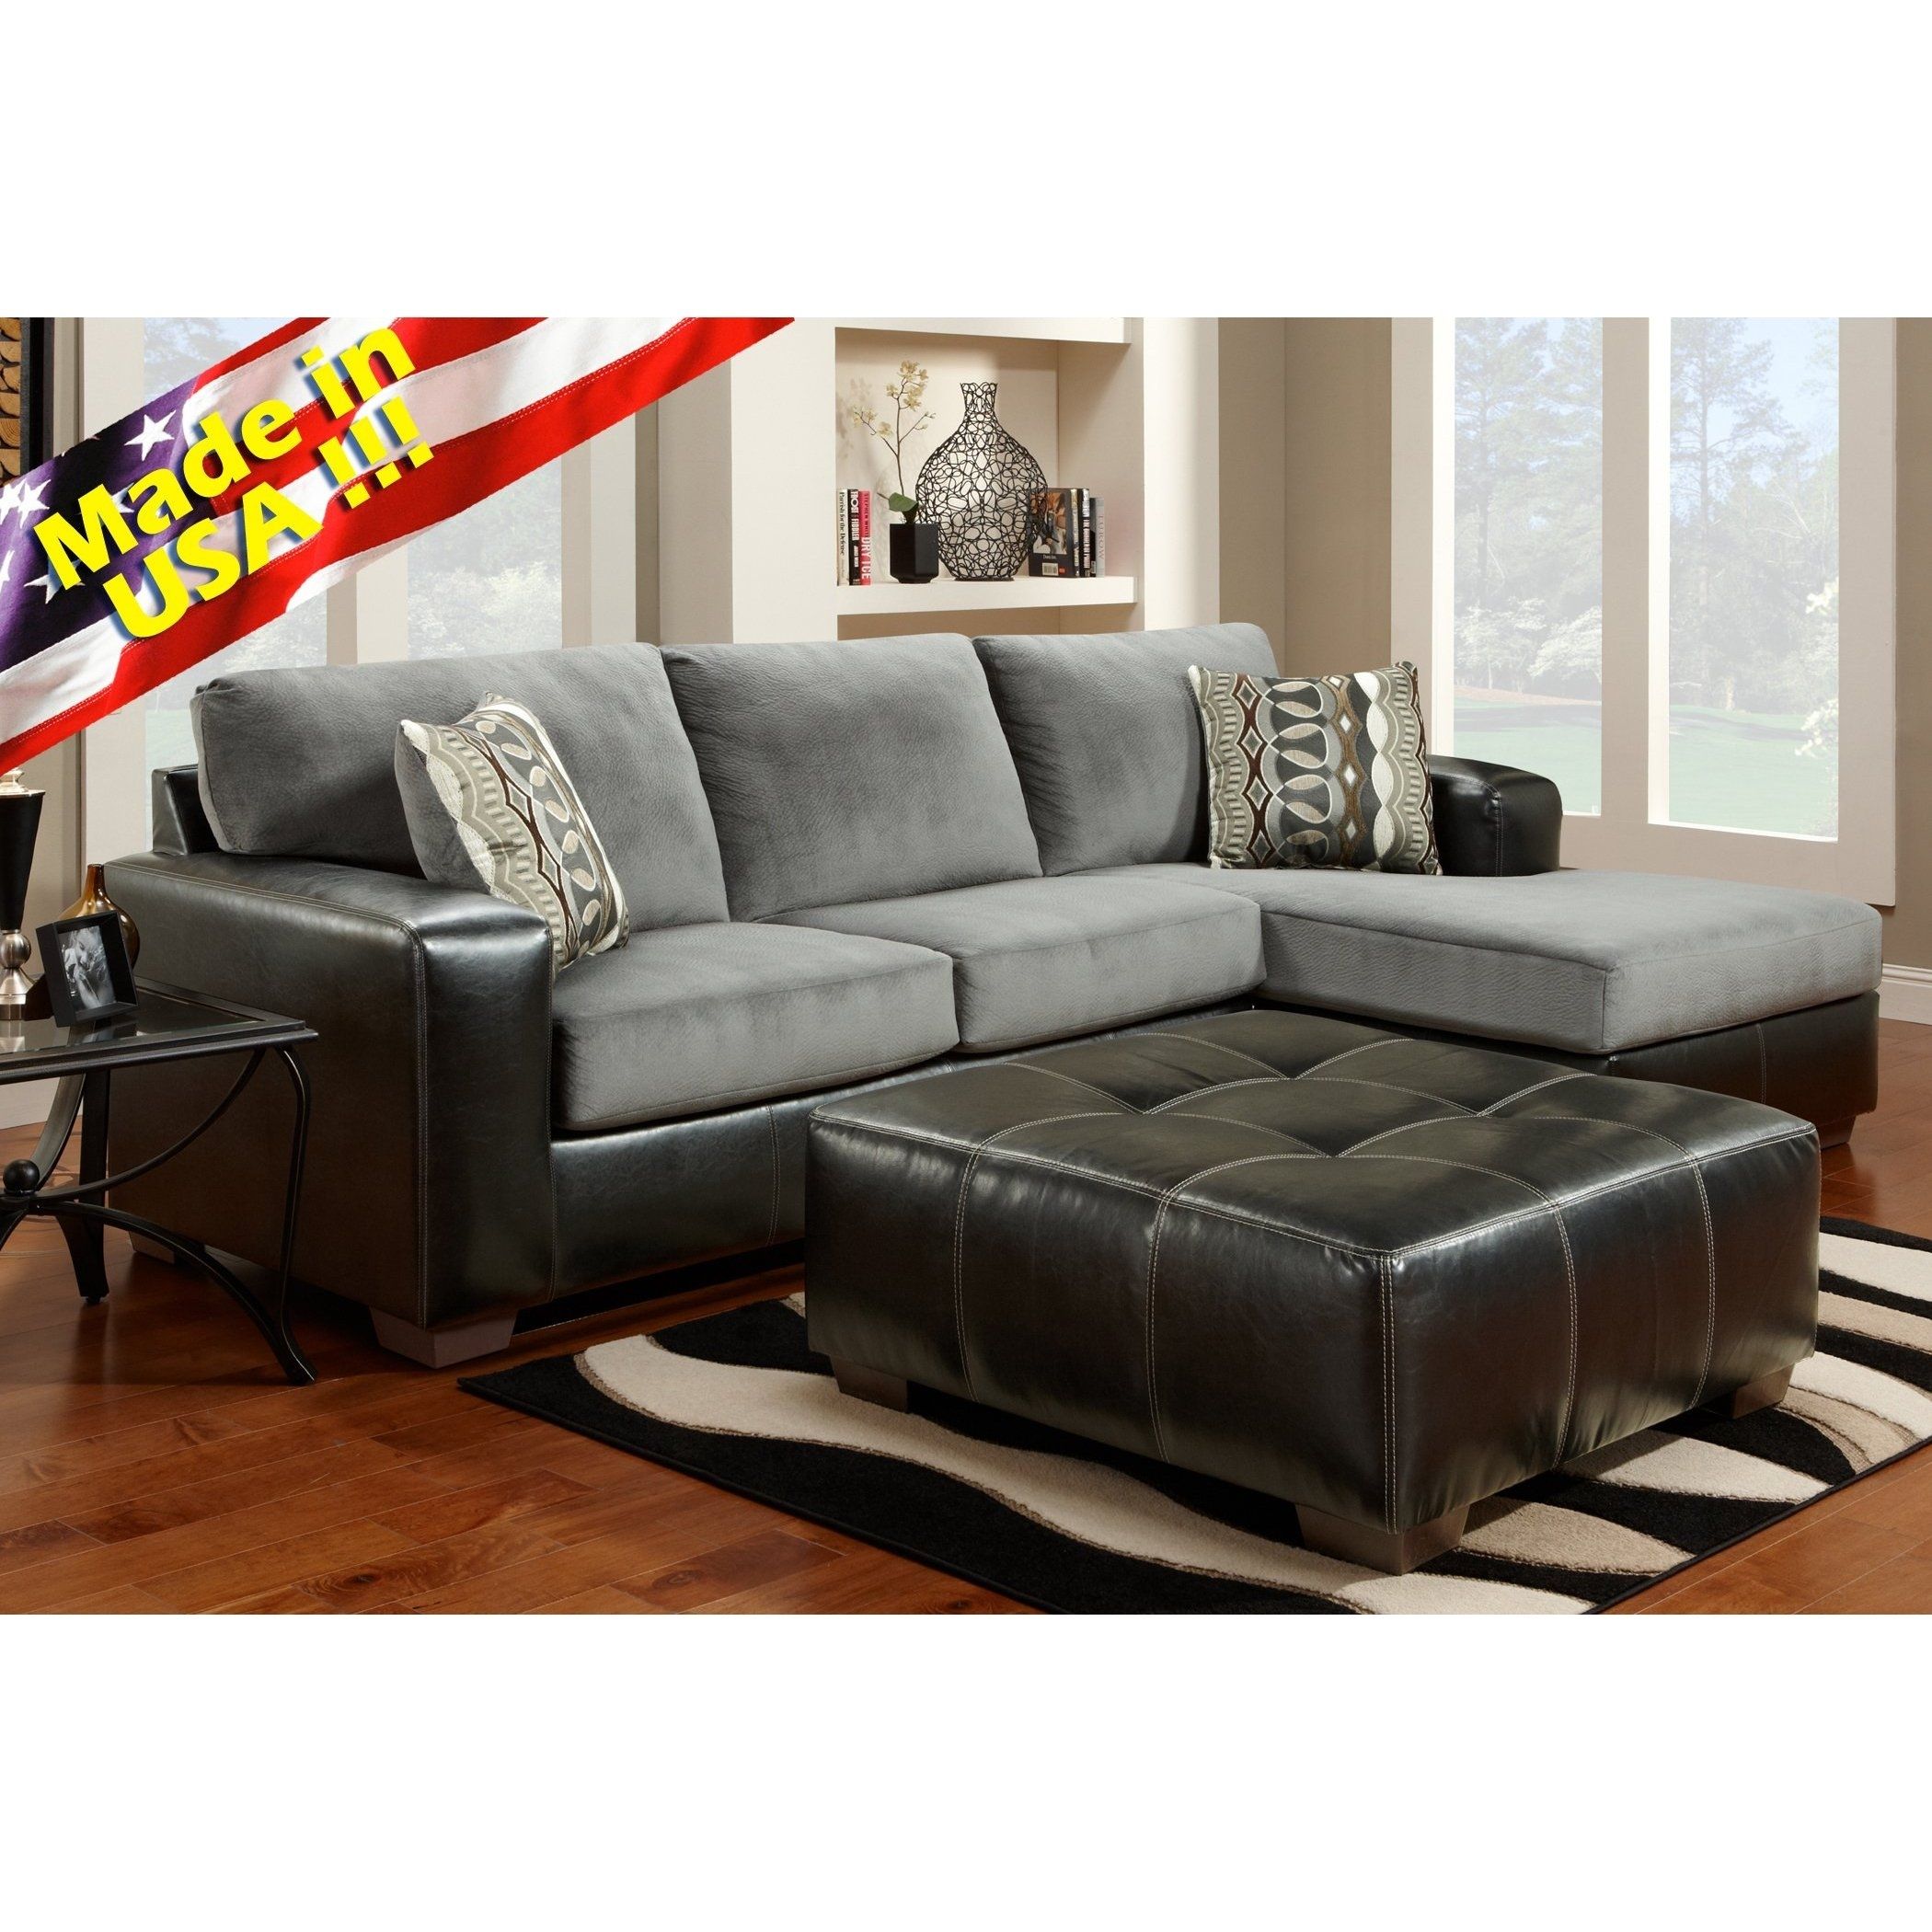 Cumulus Black Gray Two Toned Sectional Sofa Chaise Set, Made In Usa Throughout Made In Usa Sectional Sofas (Photo 7 of 10)